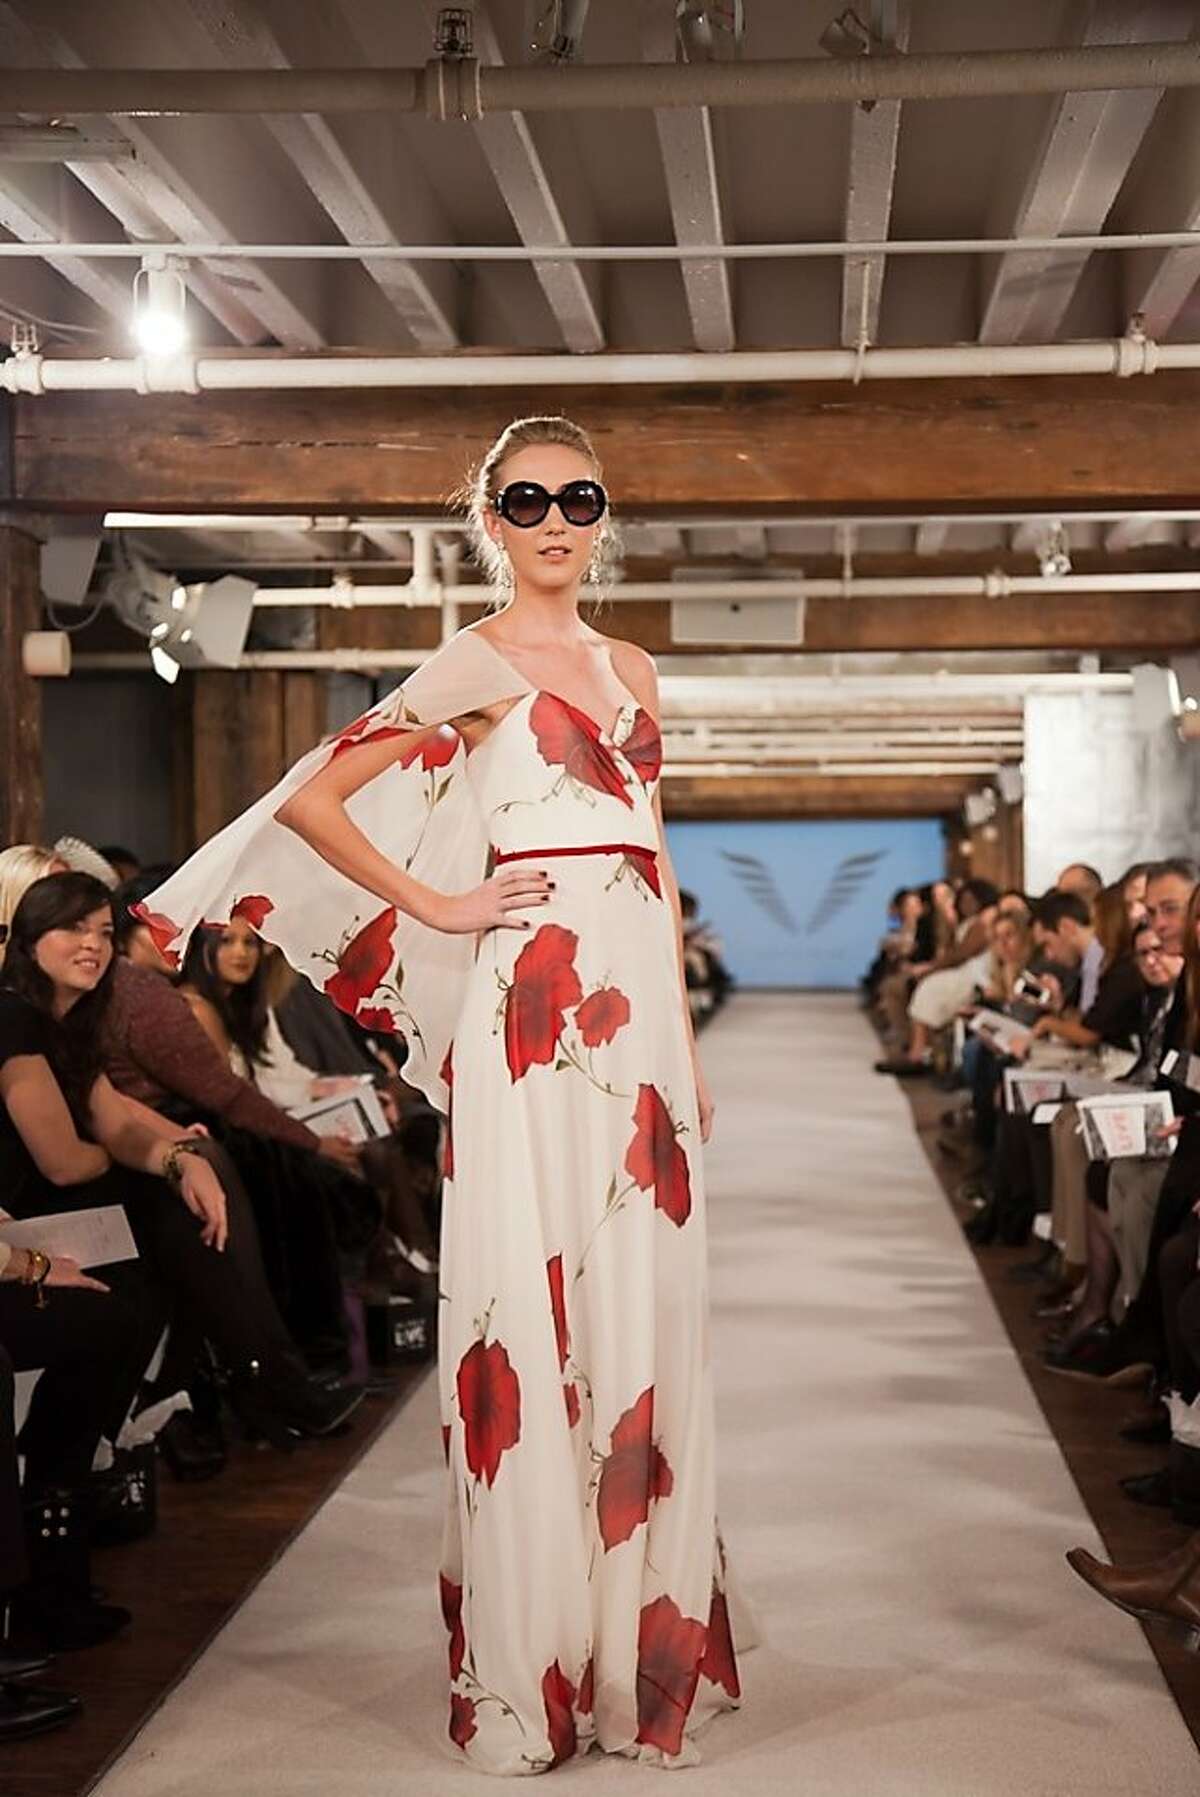 Images from the Polyvore LIve runway show, held as part of Mercedes-Benz Fashion Week in New York.